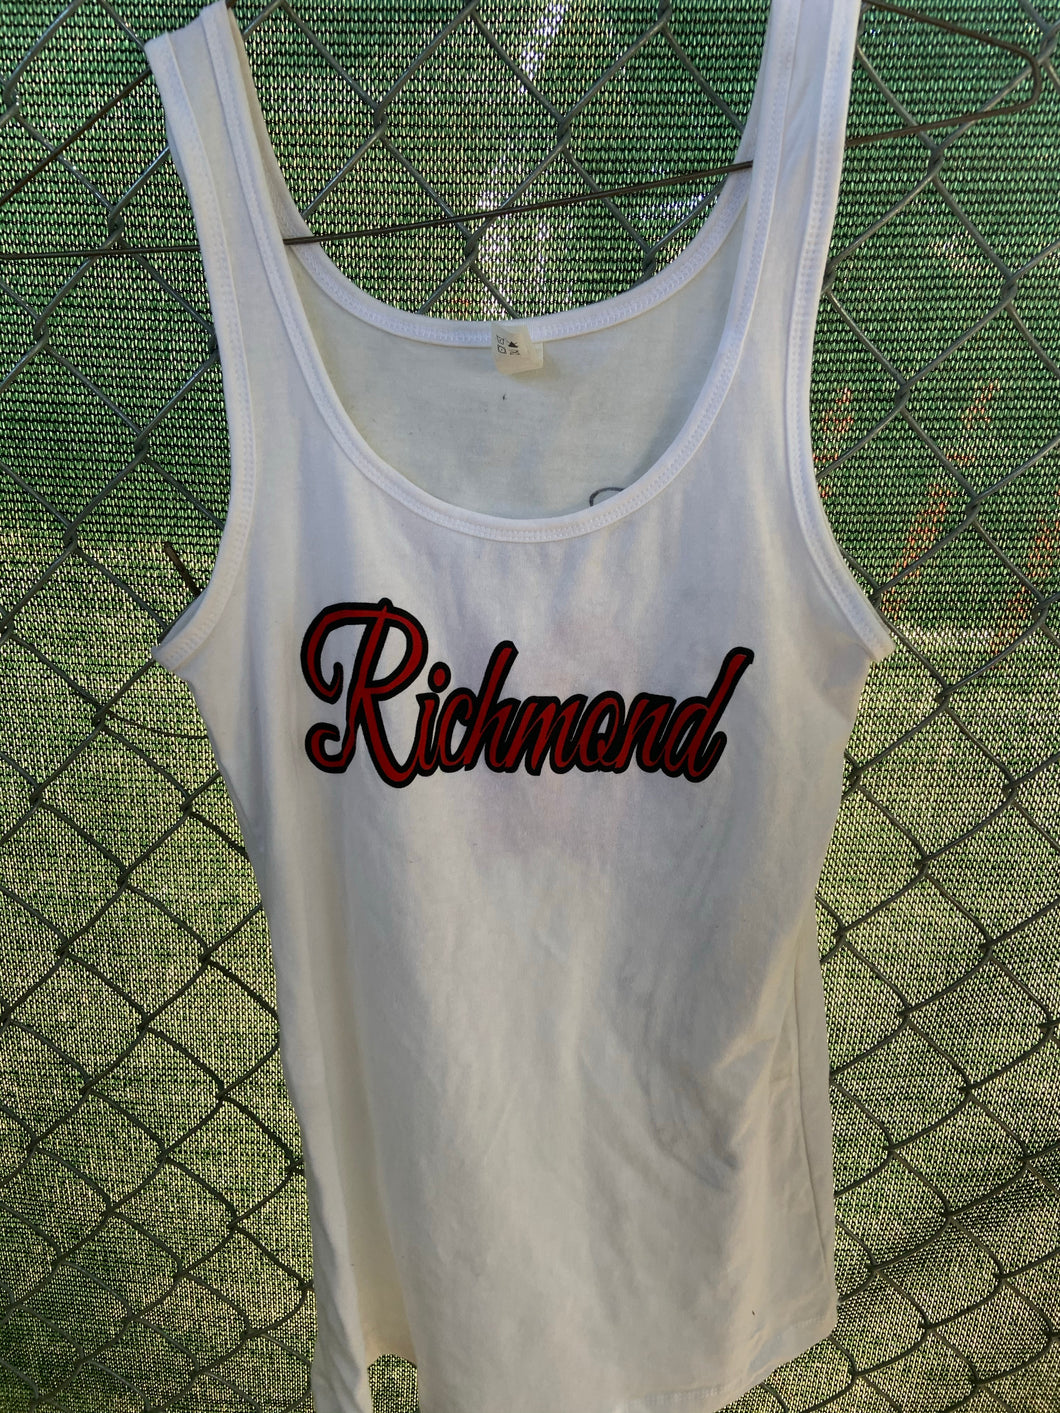 White tank with red writing and black outline